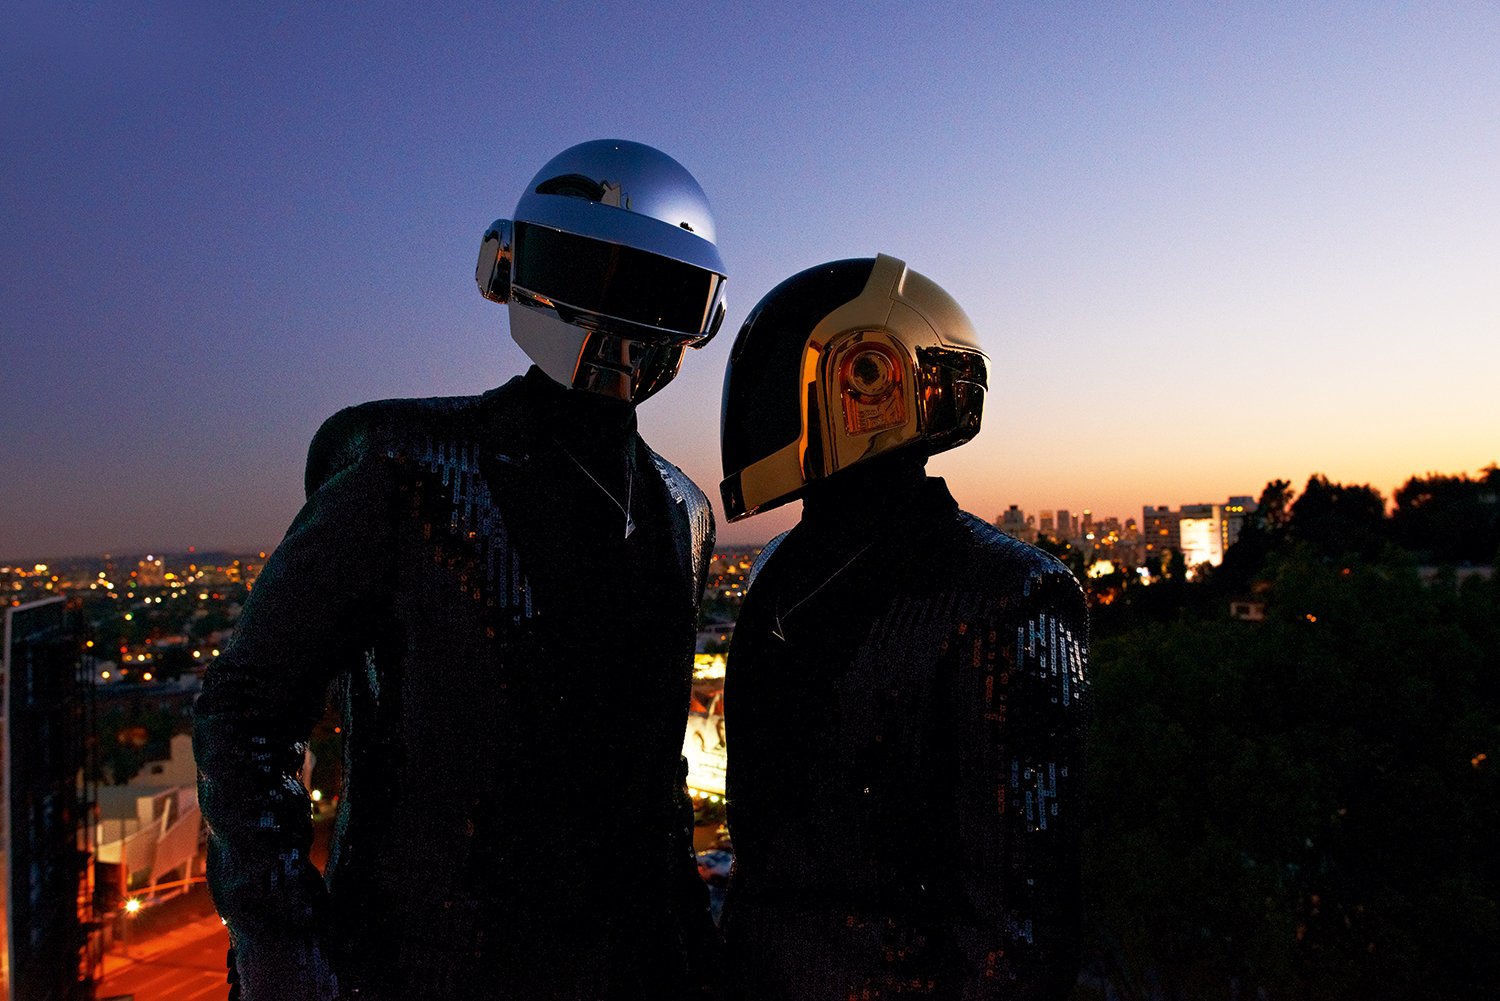 Daft Punk’s 2006 Live Set Will Be Re-Streamed This Weekend